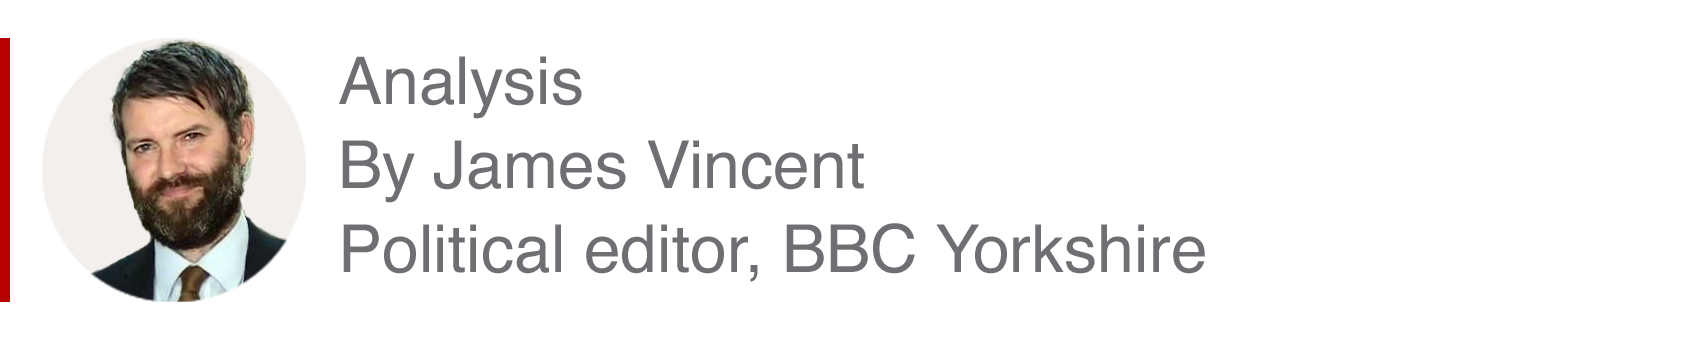 Analysis box by James Vincent, Political editor, BBC Yorkshire